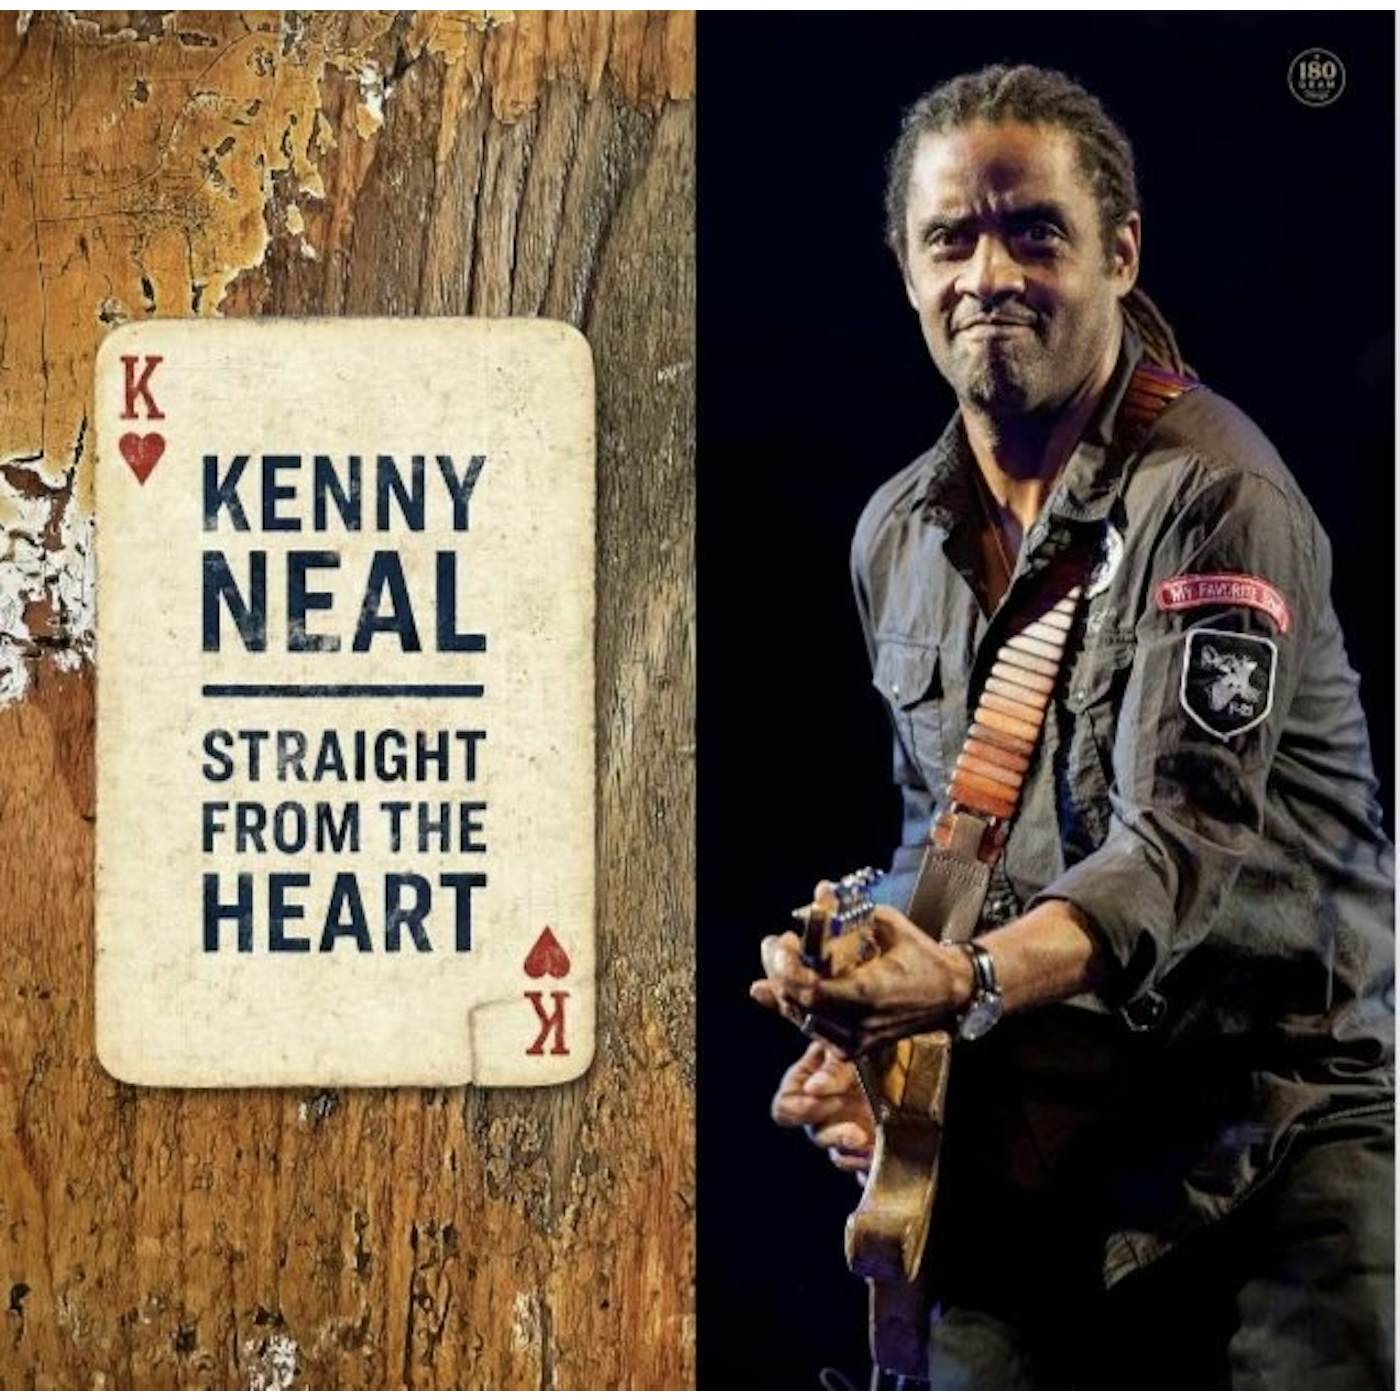 Kenny Neal STRAIGHT FROM THE HEART CD